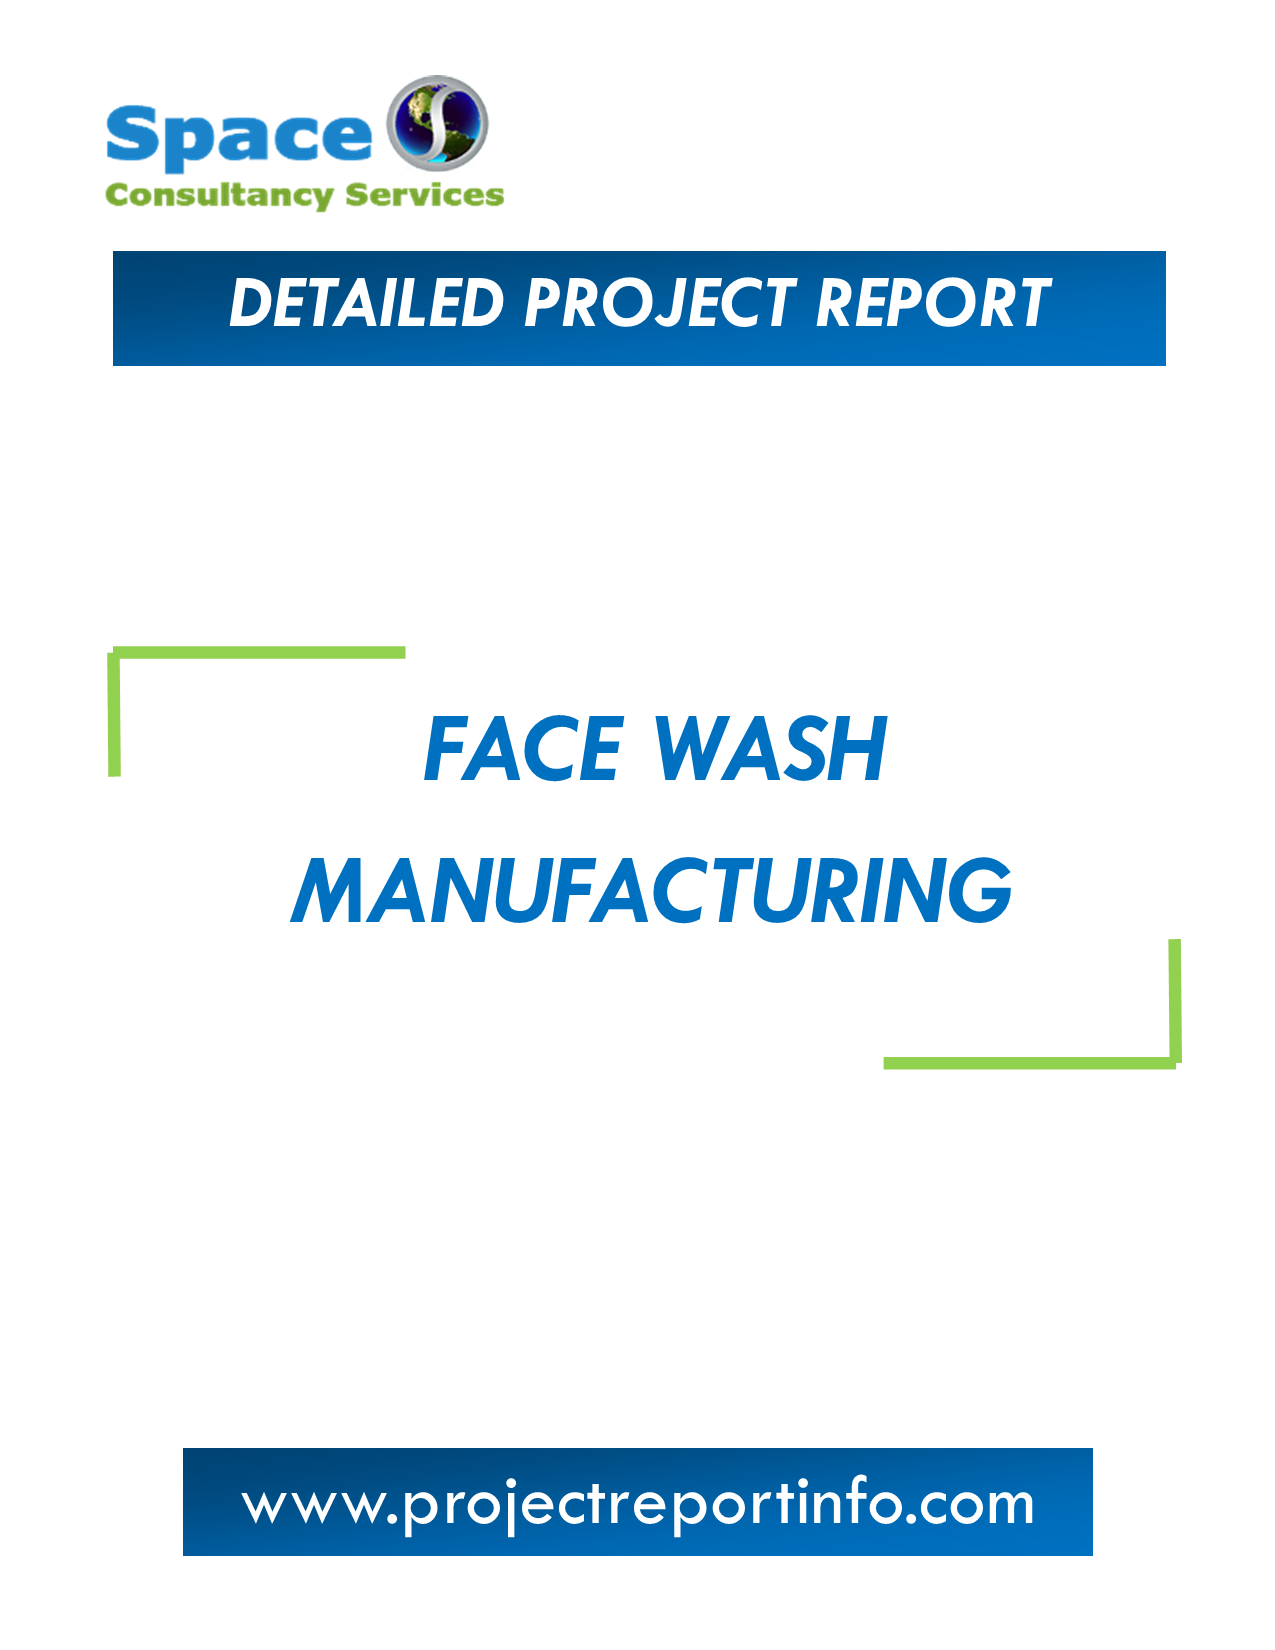 Project Report on Face Wash Manufacturing